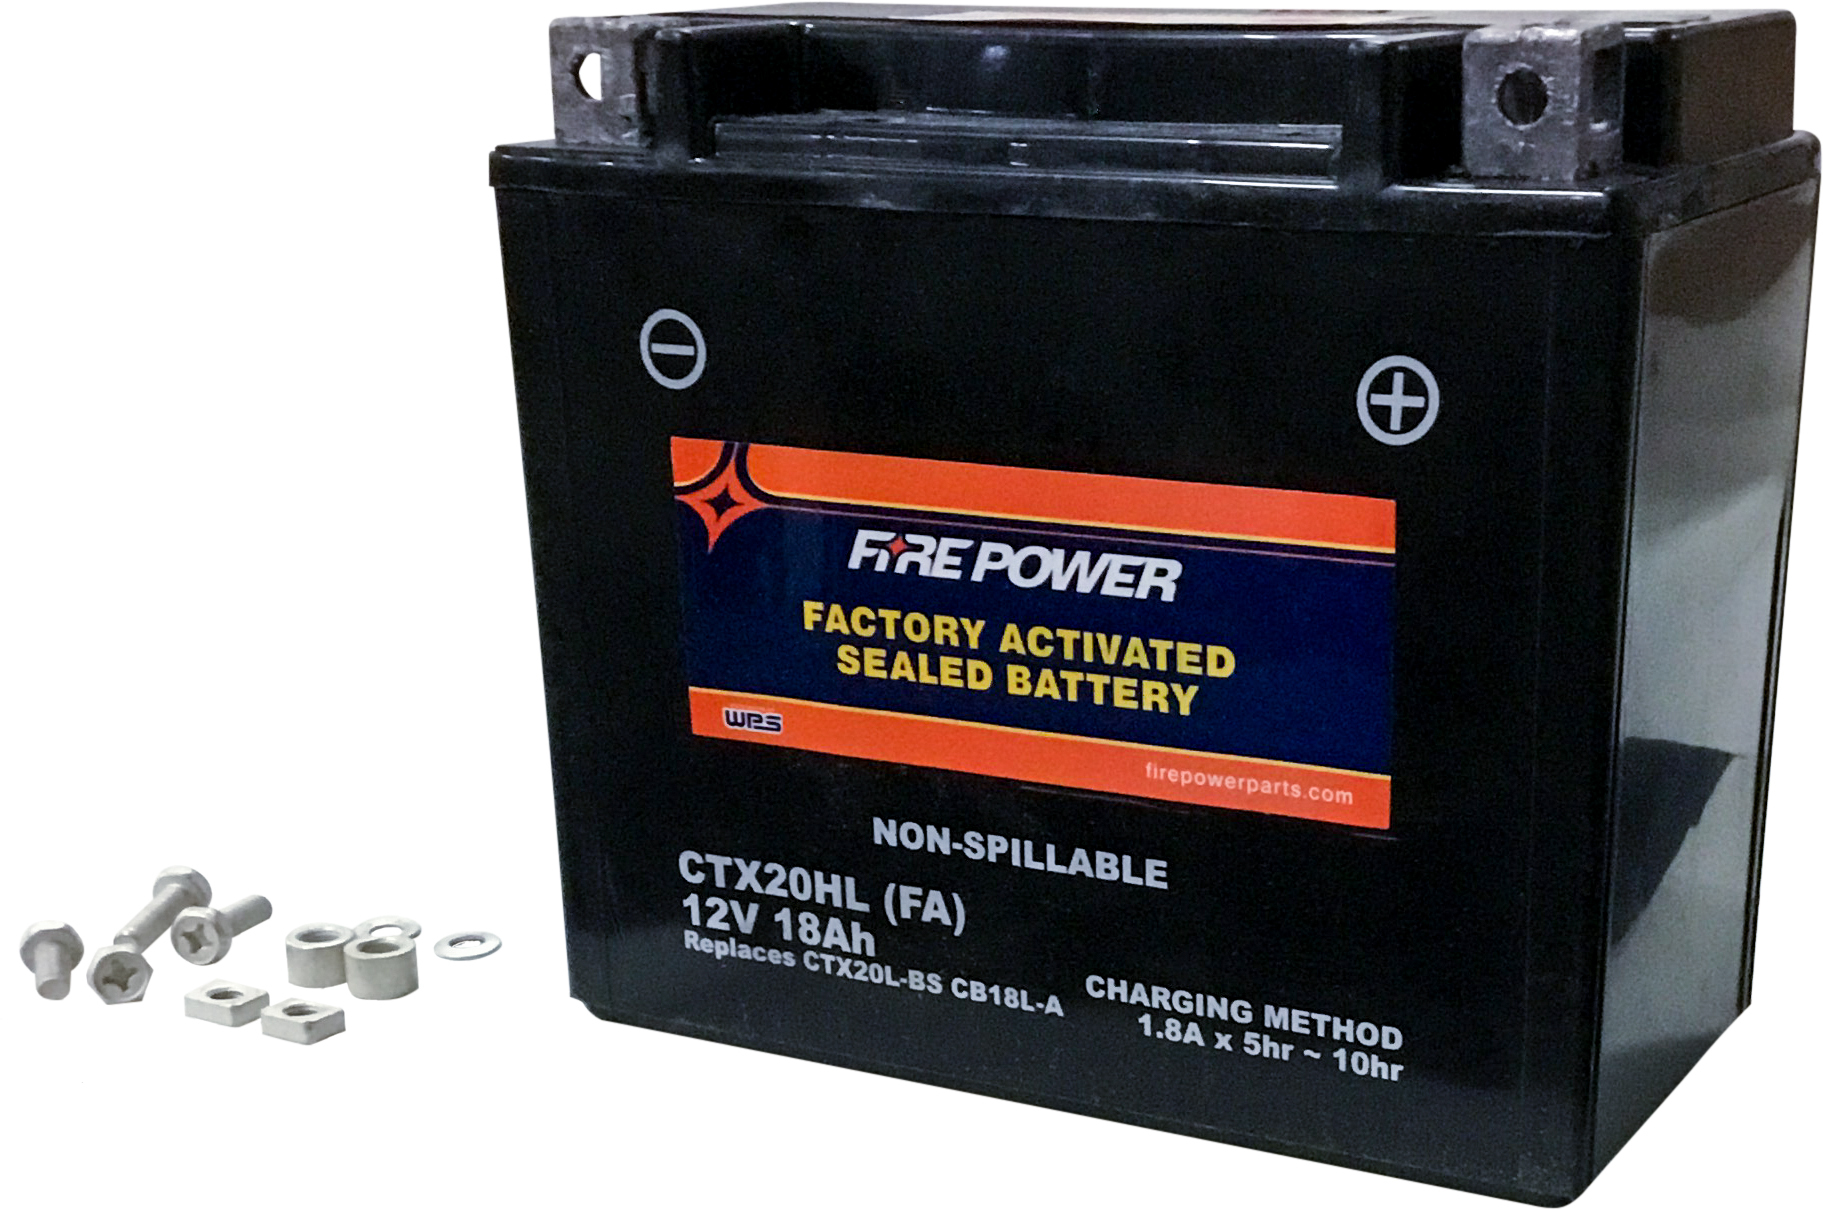 Fire Power - Battery Ctx20hl Sealed Factory Activated - CTX20HL-BS(FA)